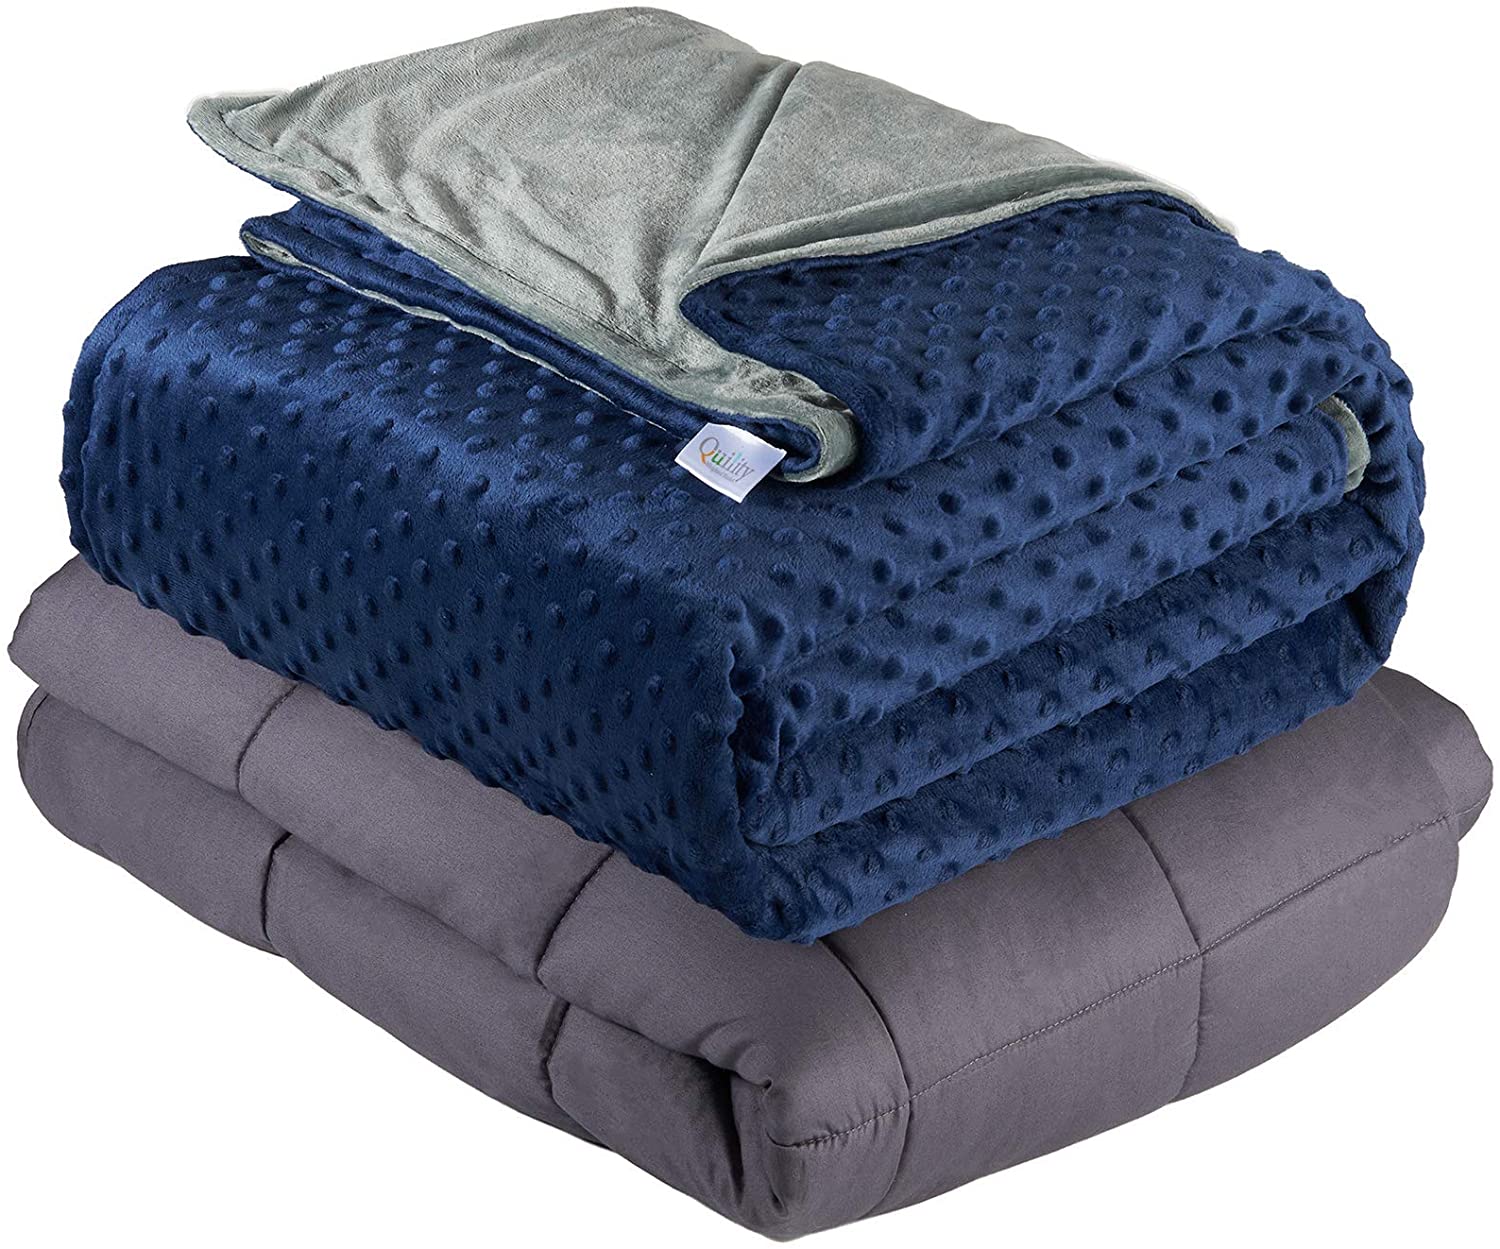 60x80, Navy Blue, Twin Size Weighted Blanket, Soft Fleece Heavy Blanket with Glass Beads ZonLi Plush Weighted Blanket 15 lbs